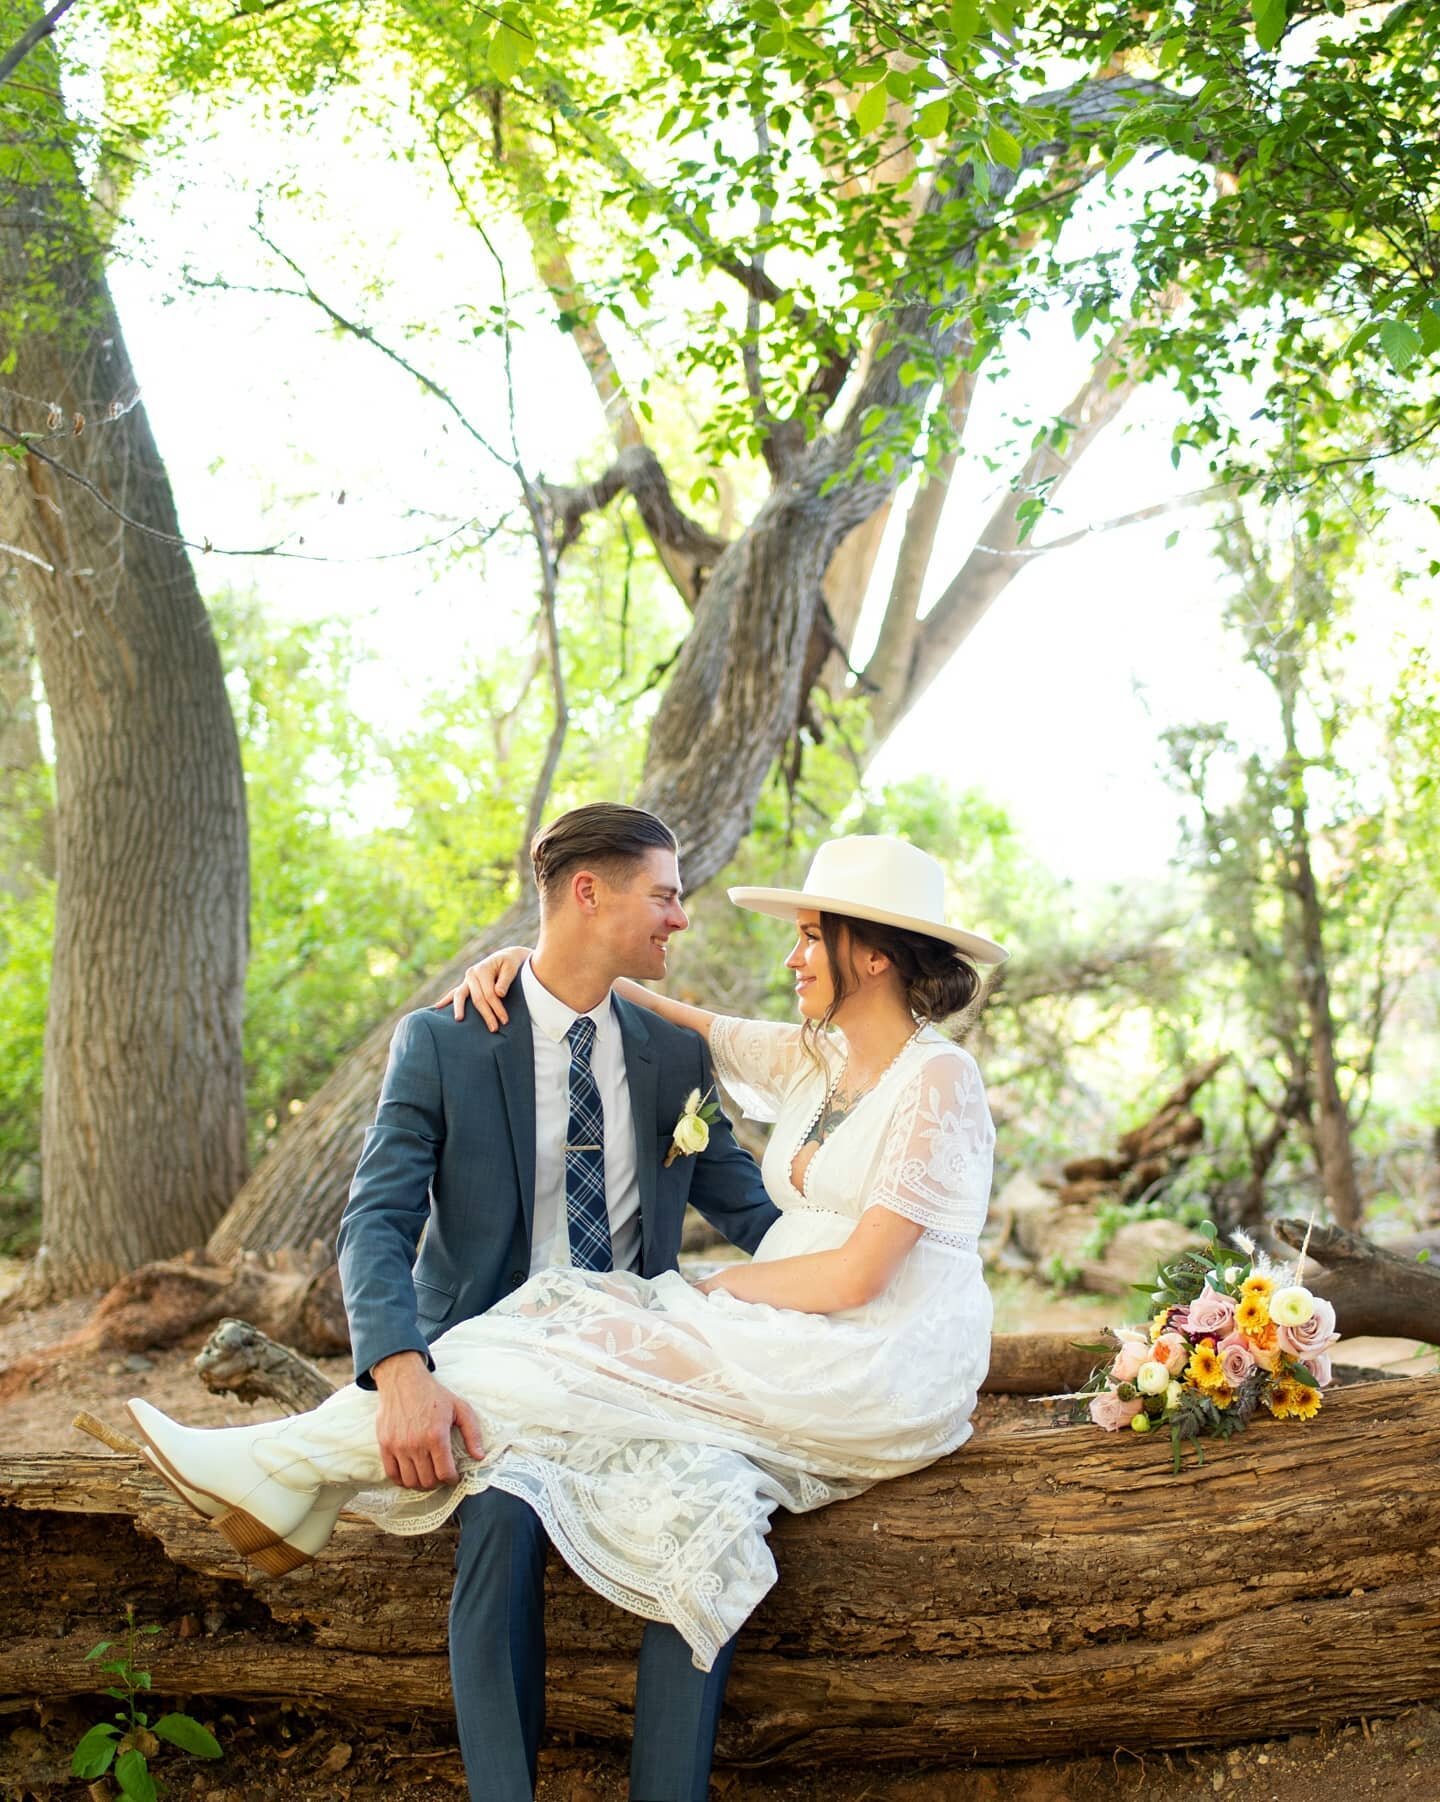 the most charming creekside courtship
&bull;
these two eloped just the two of them at the edge of Oak Creek. with only an officiant &amp; me to hear their vows, a sweet old couple they'd never met to sign as witnesses, and then they blessed the begin